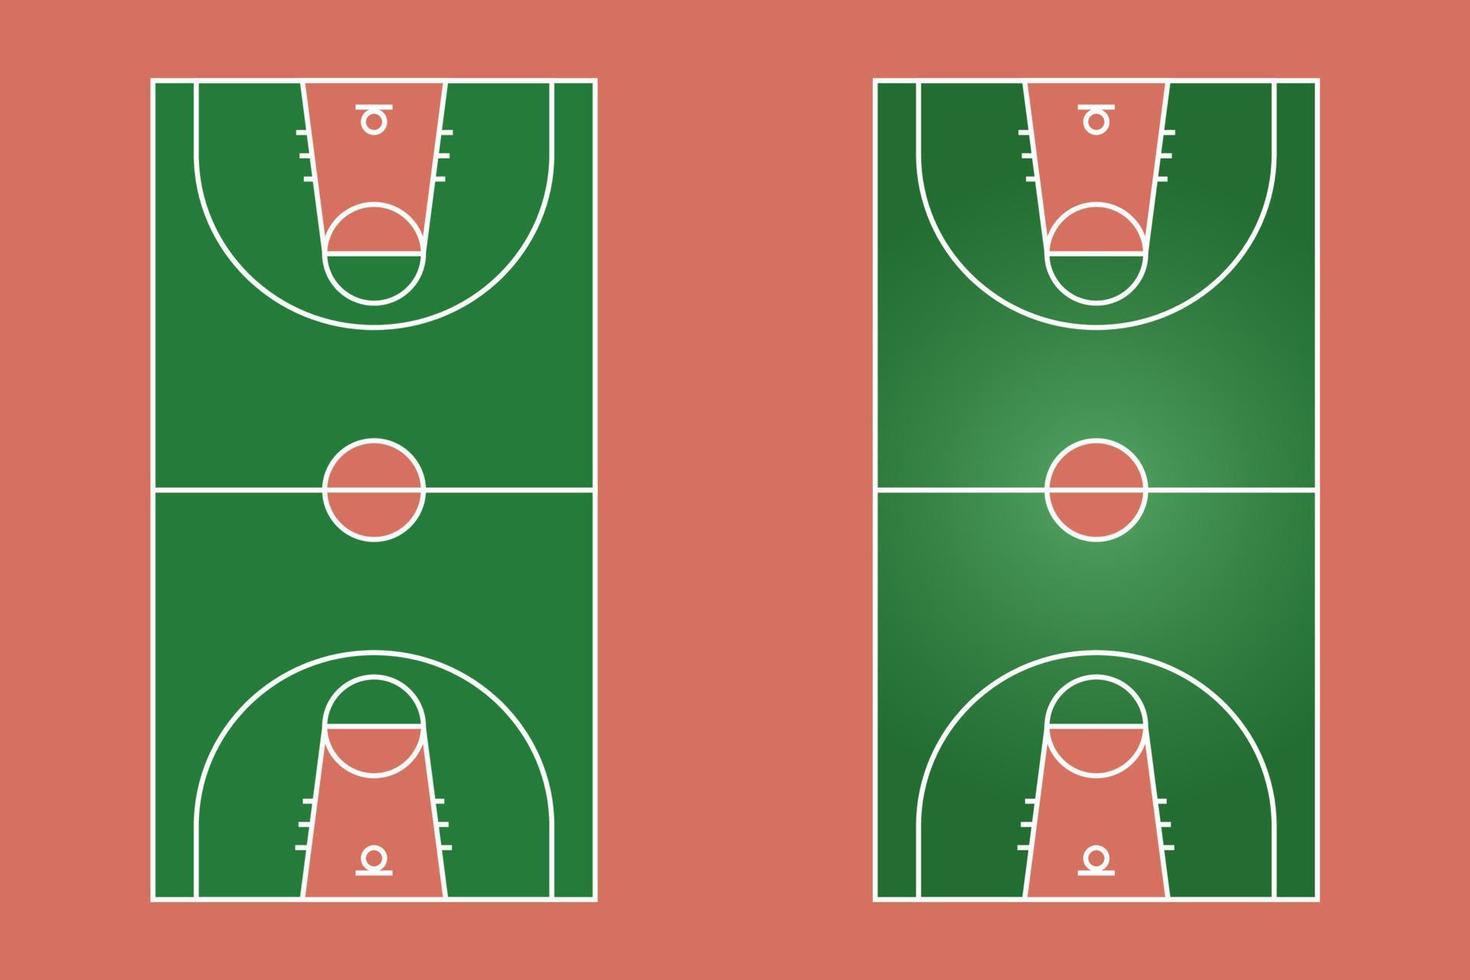 Basketball field flat design, Sport field graphic illustration, Vector of basketball court and layout.